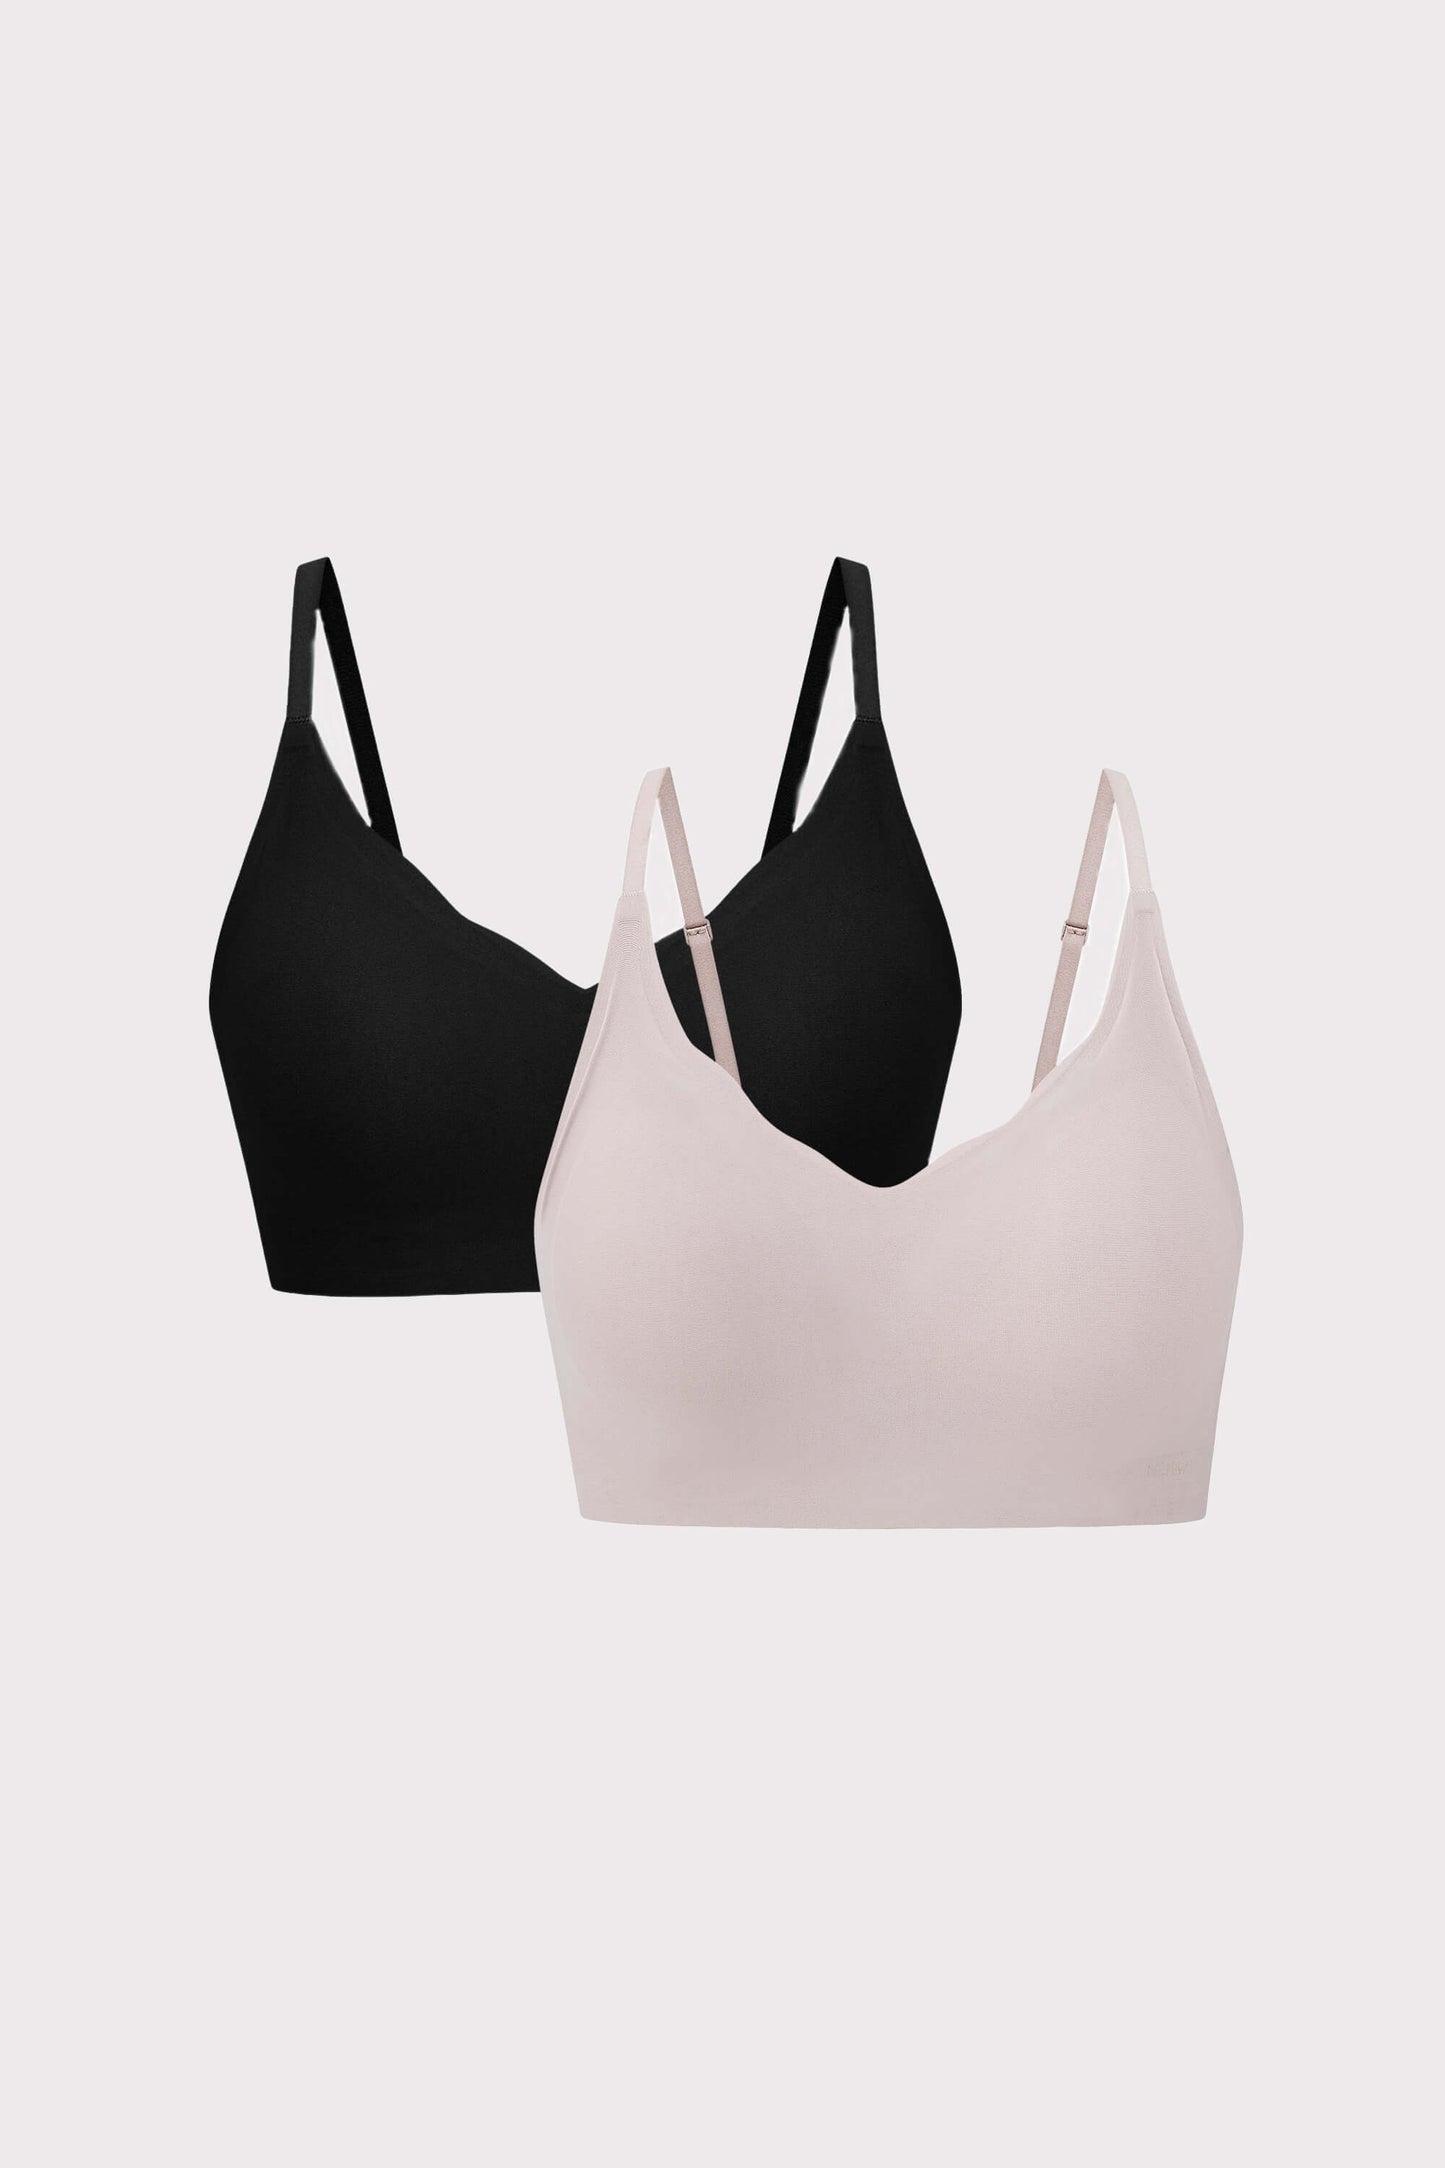 two bras in black and light pink